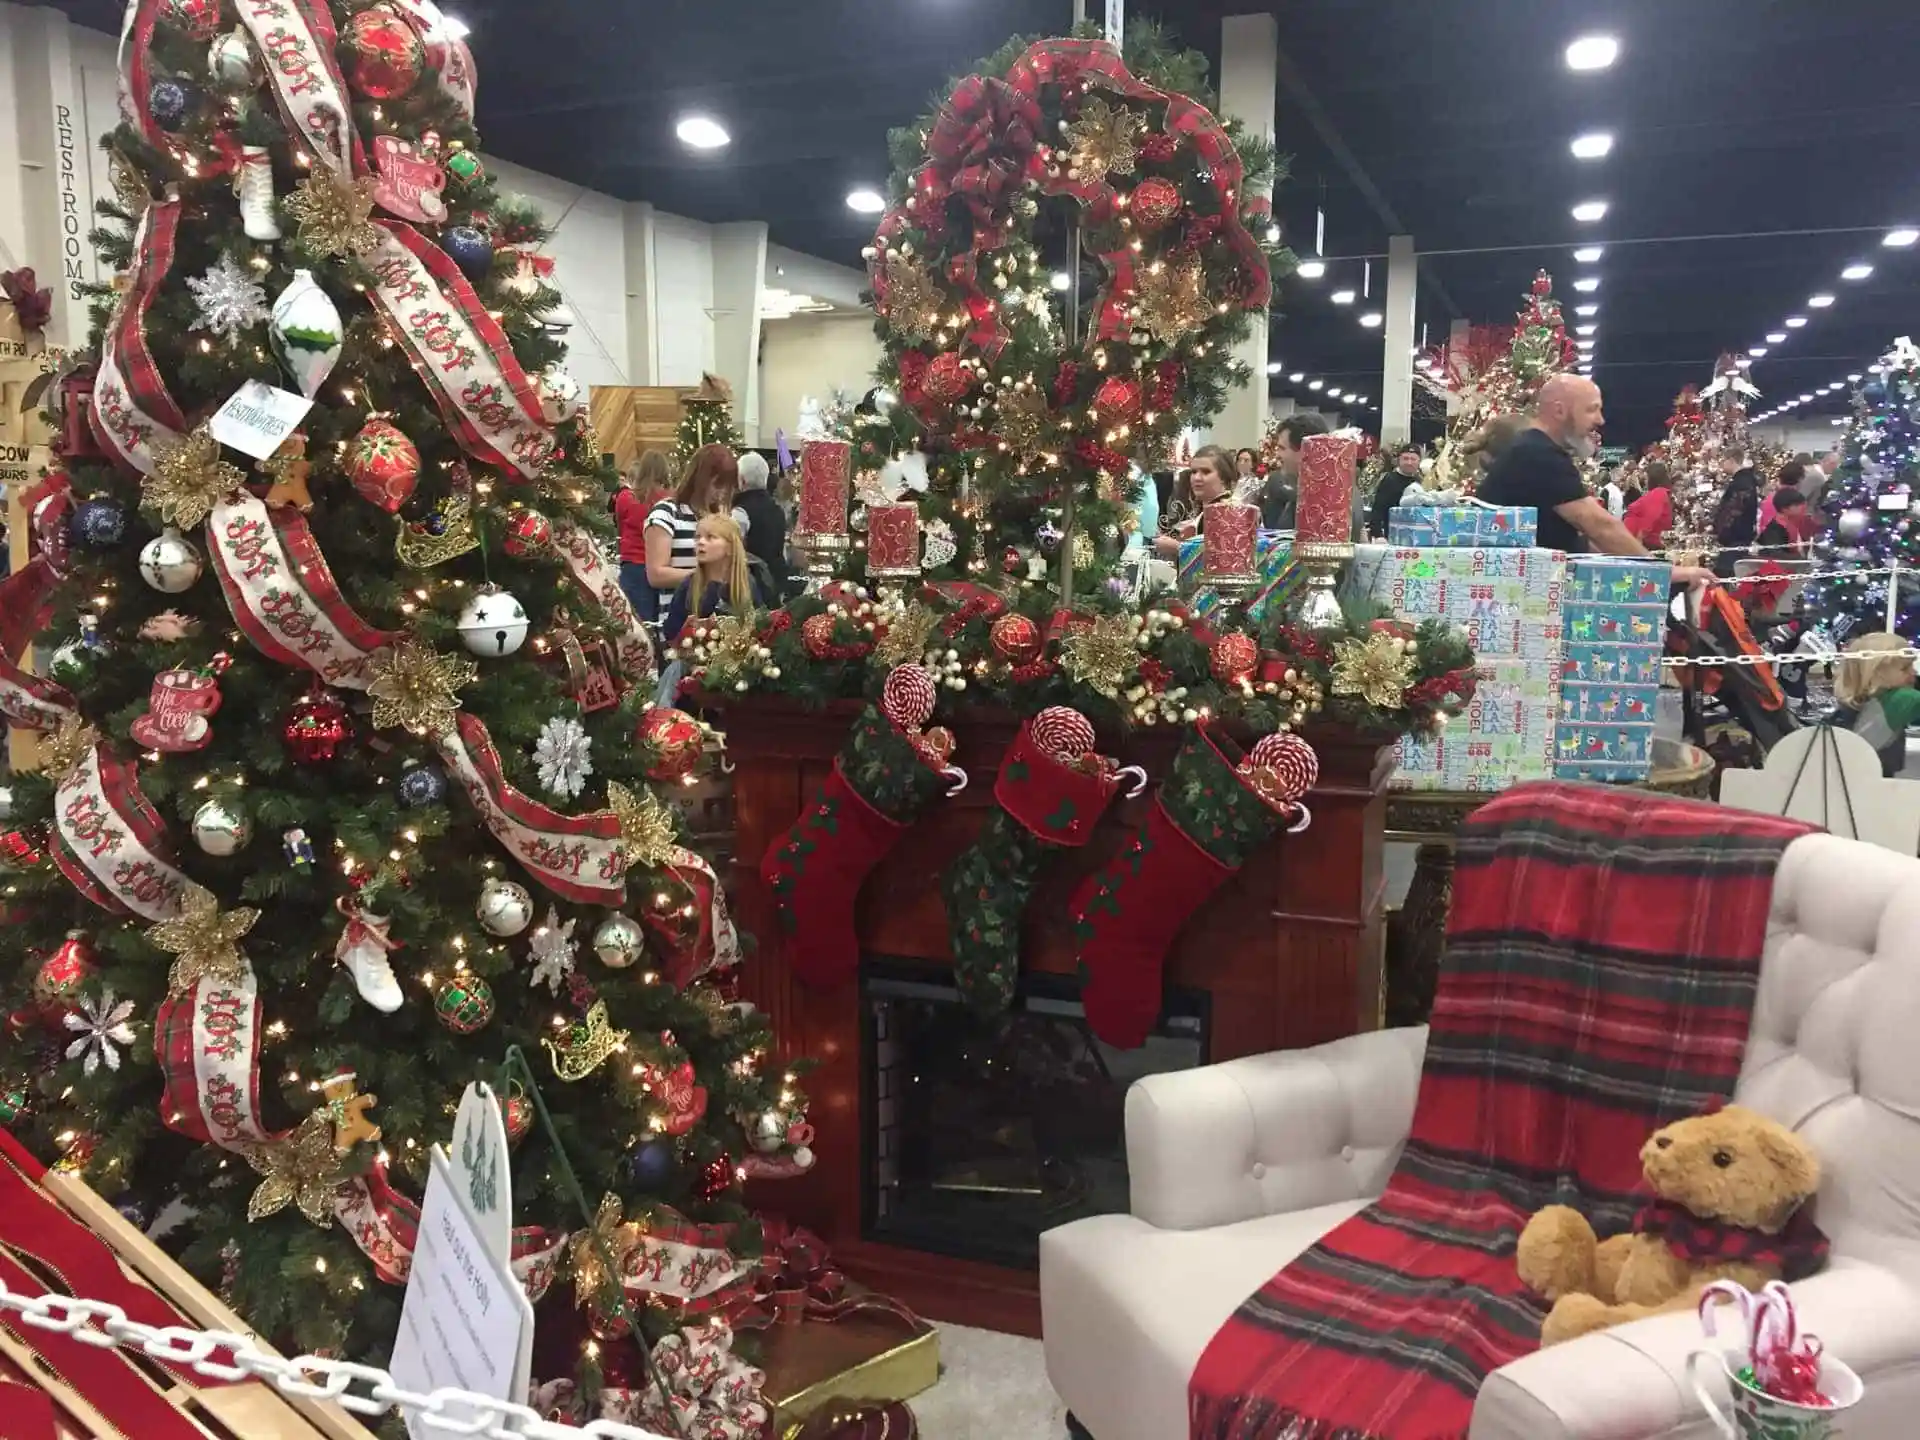 There are so many Christmas tree displays at the Festival of Trees